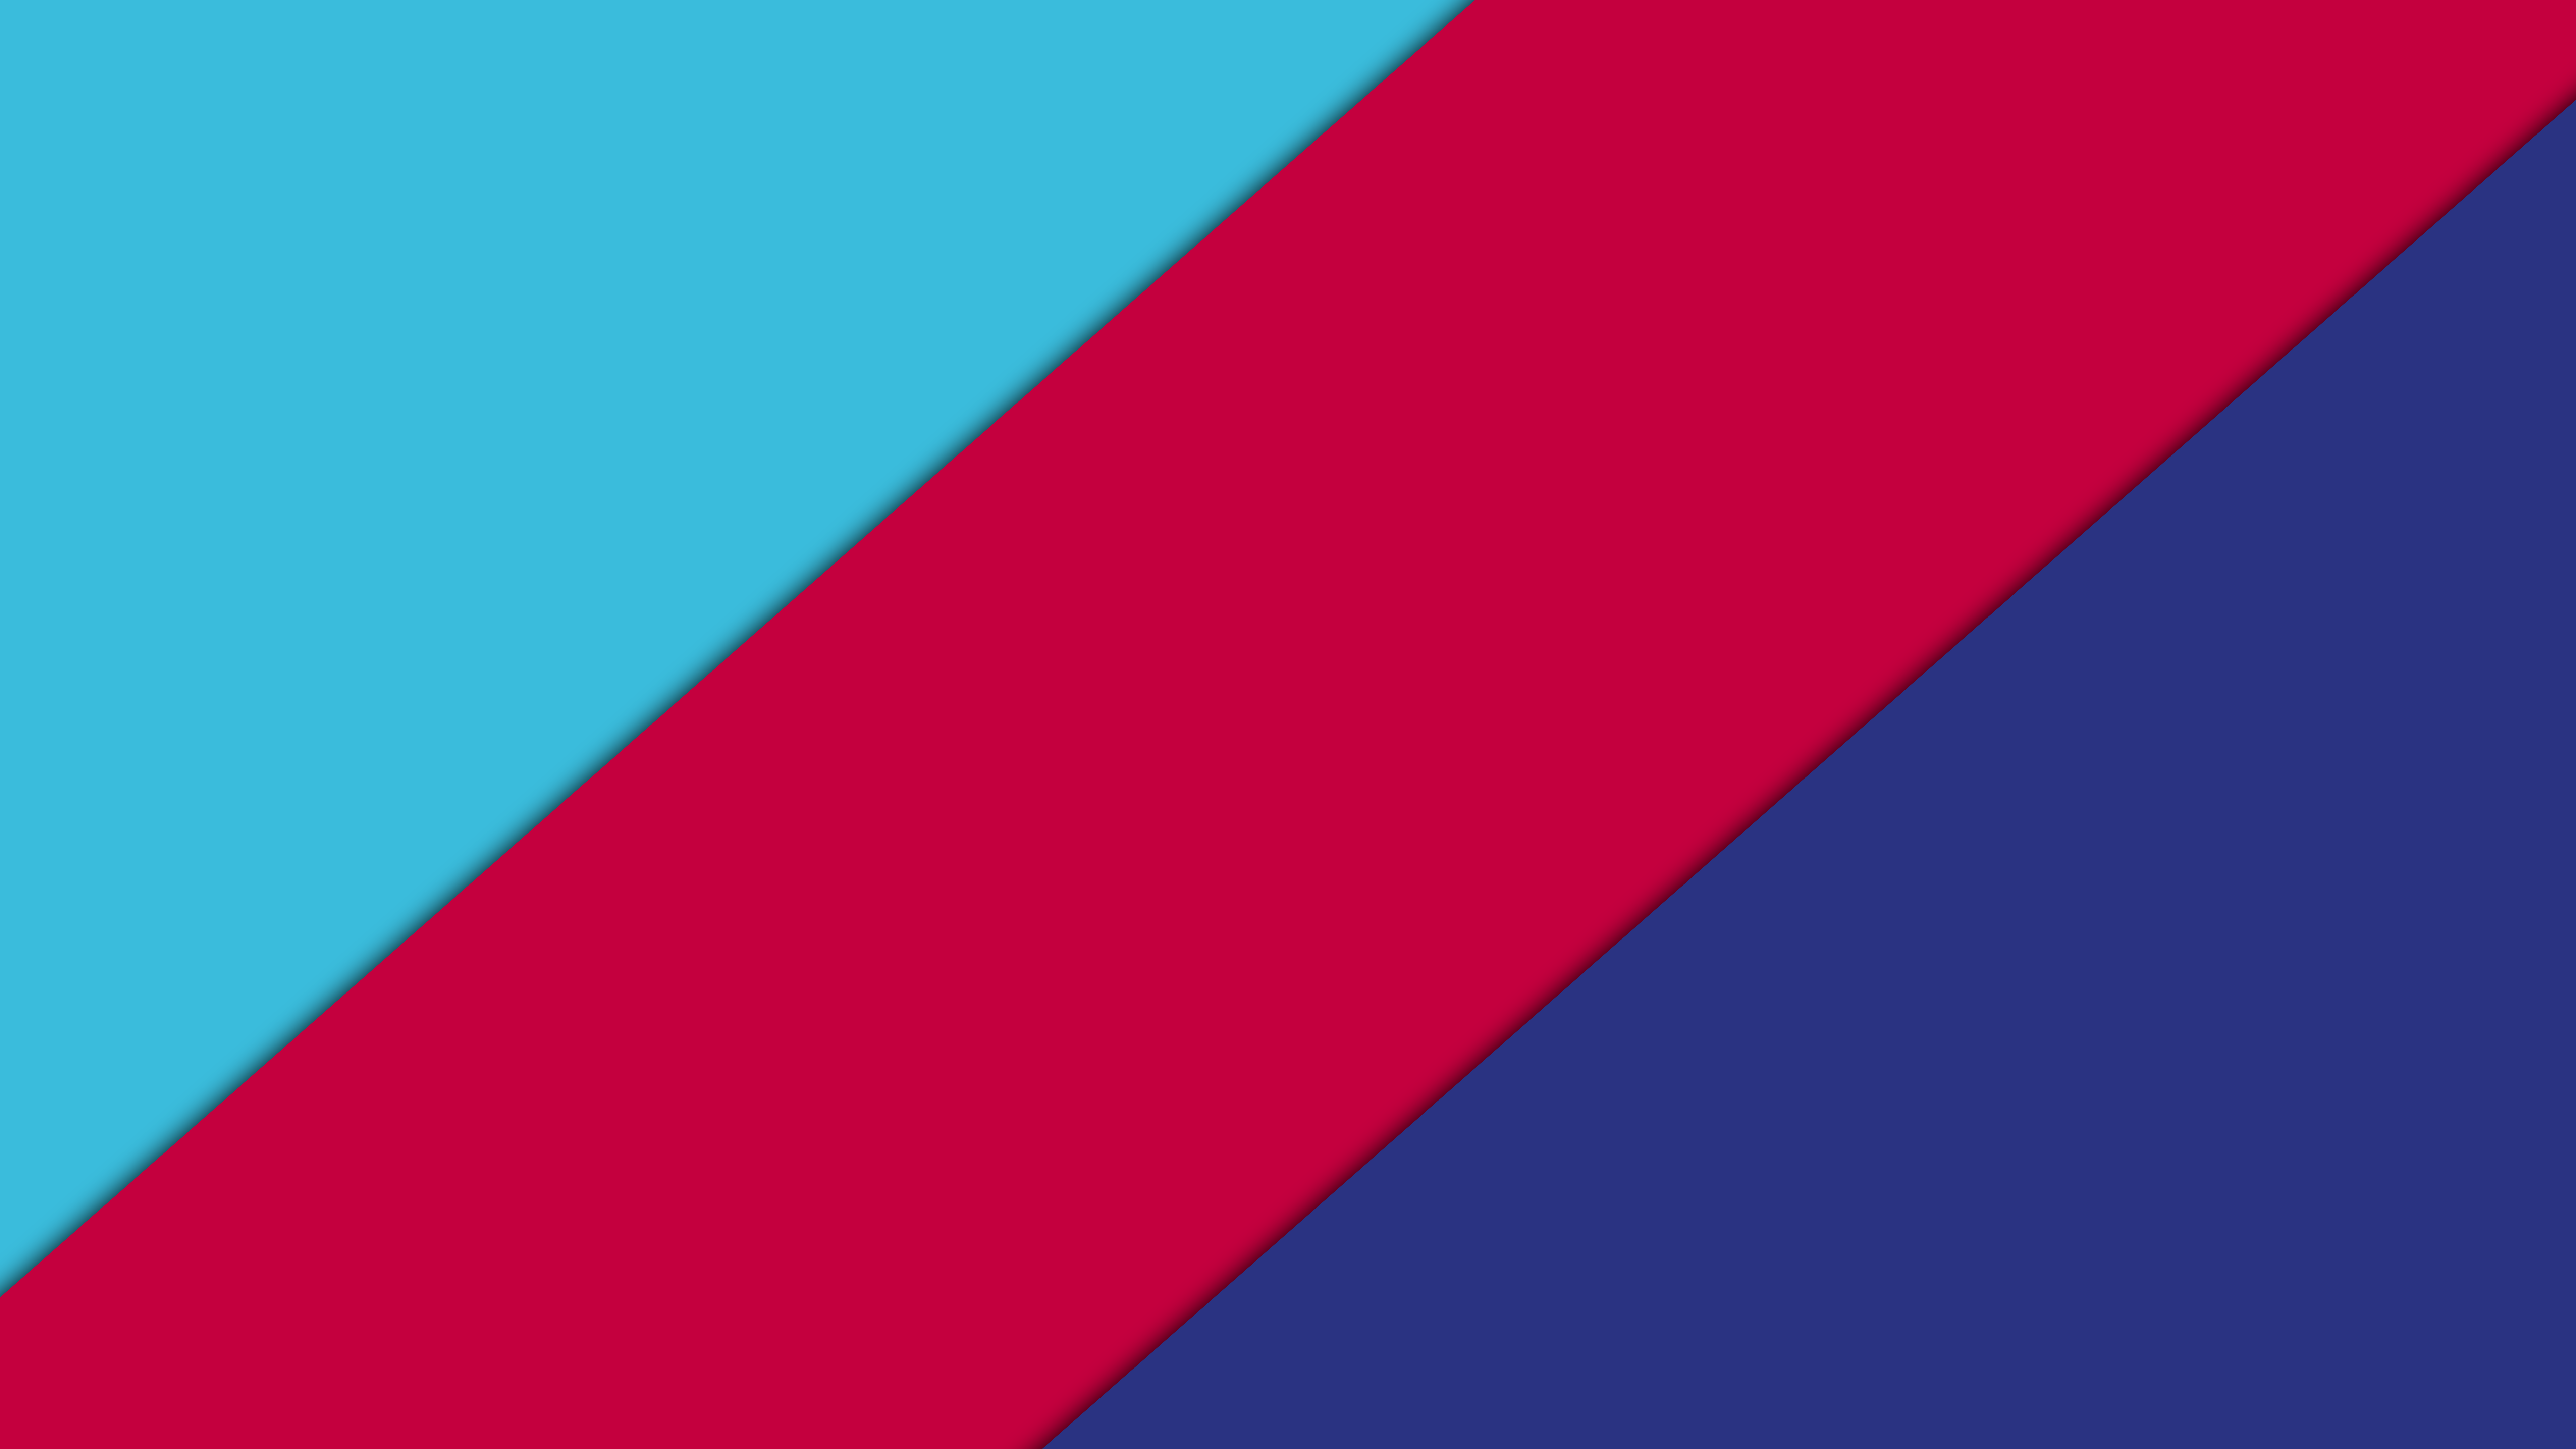 General 7680x4320 stripes abstract texture cyan red blue simple background digital art minimalism